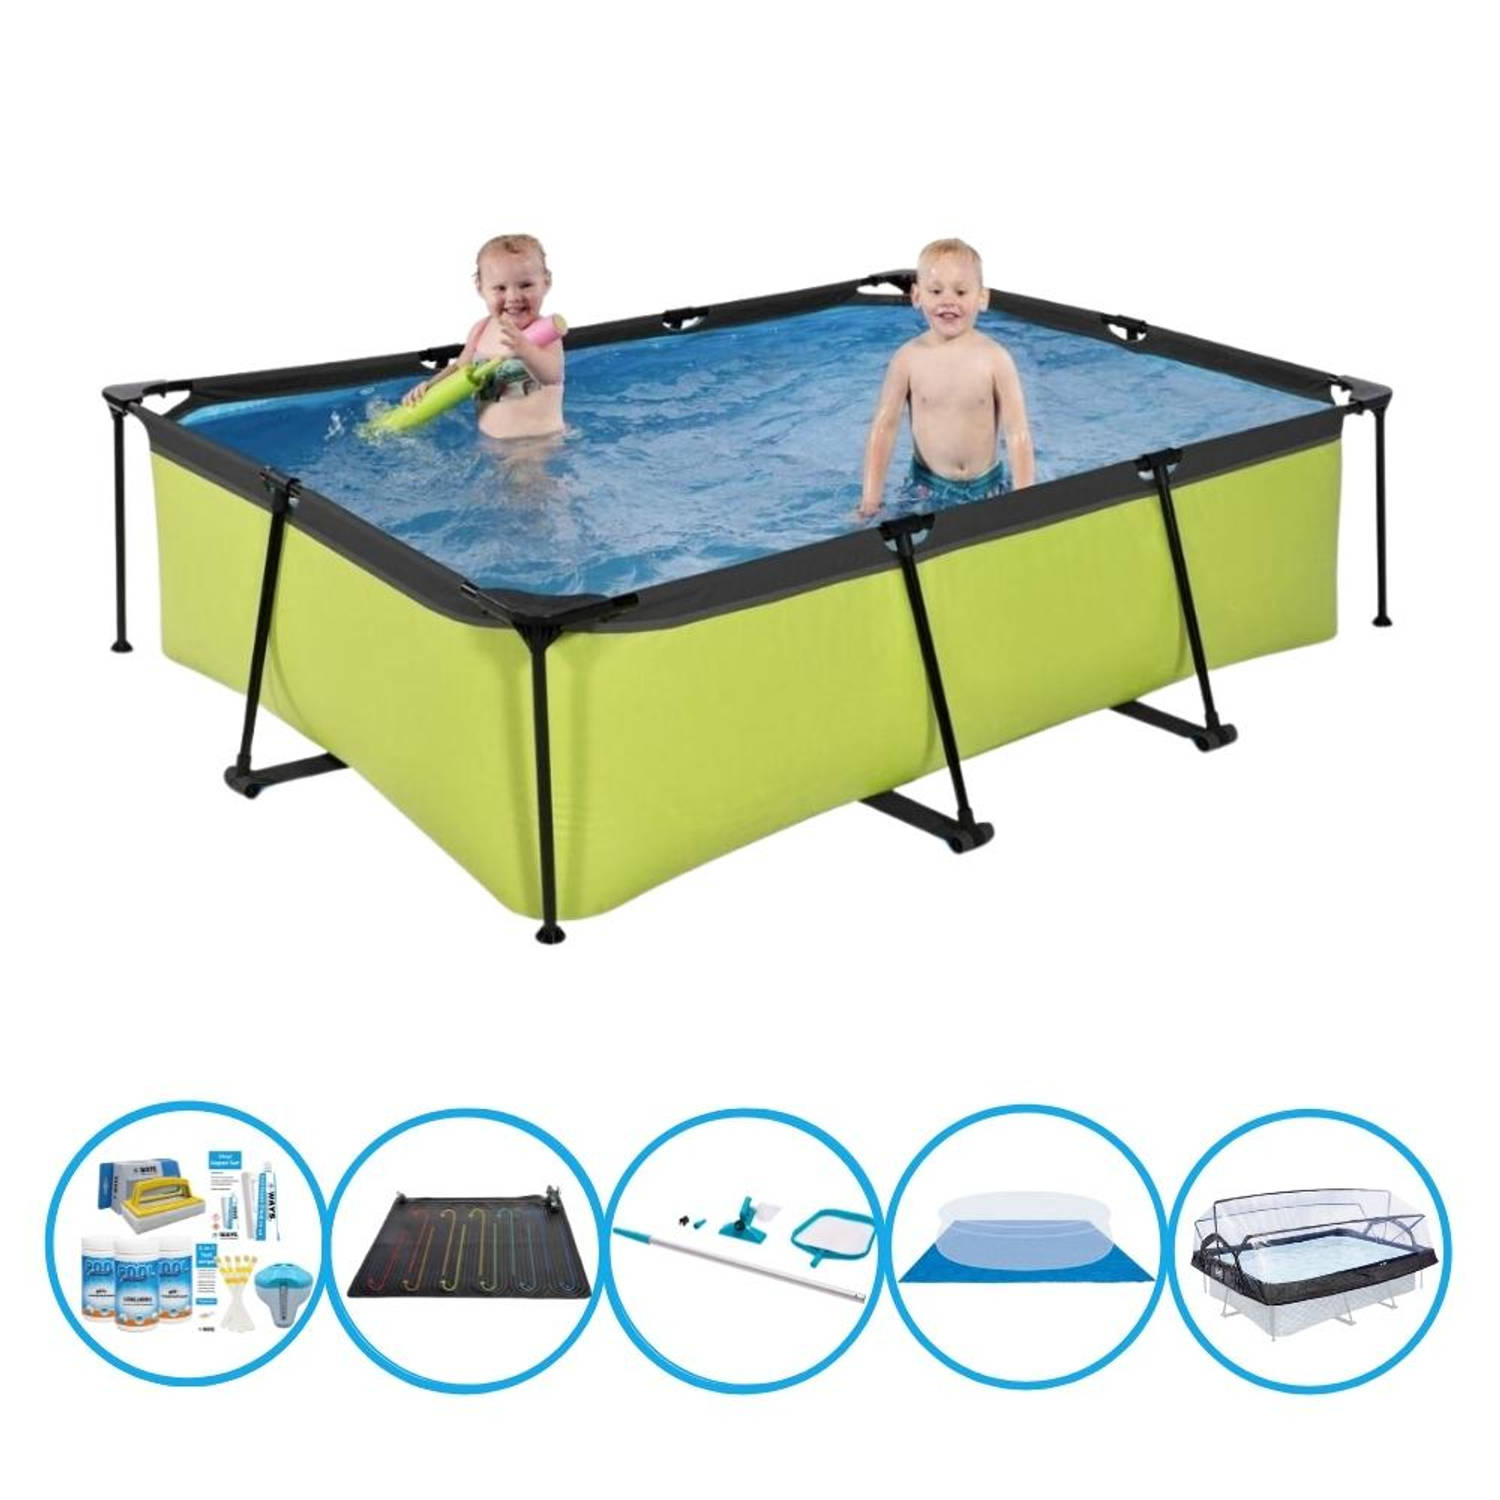 EXIT Zwembad Lime - 220x150x60 cm - Frame Pool - Inclusief accessoires